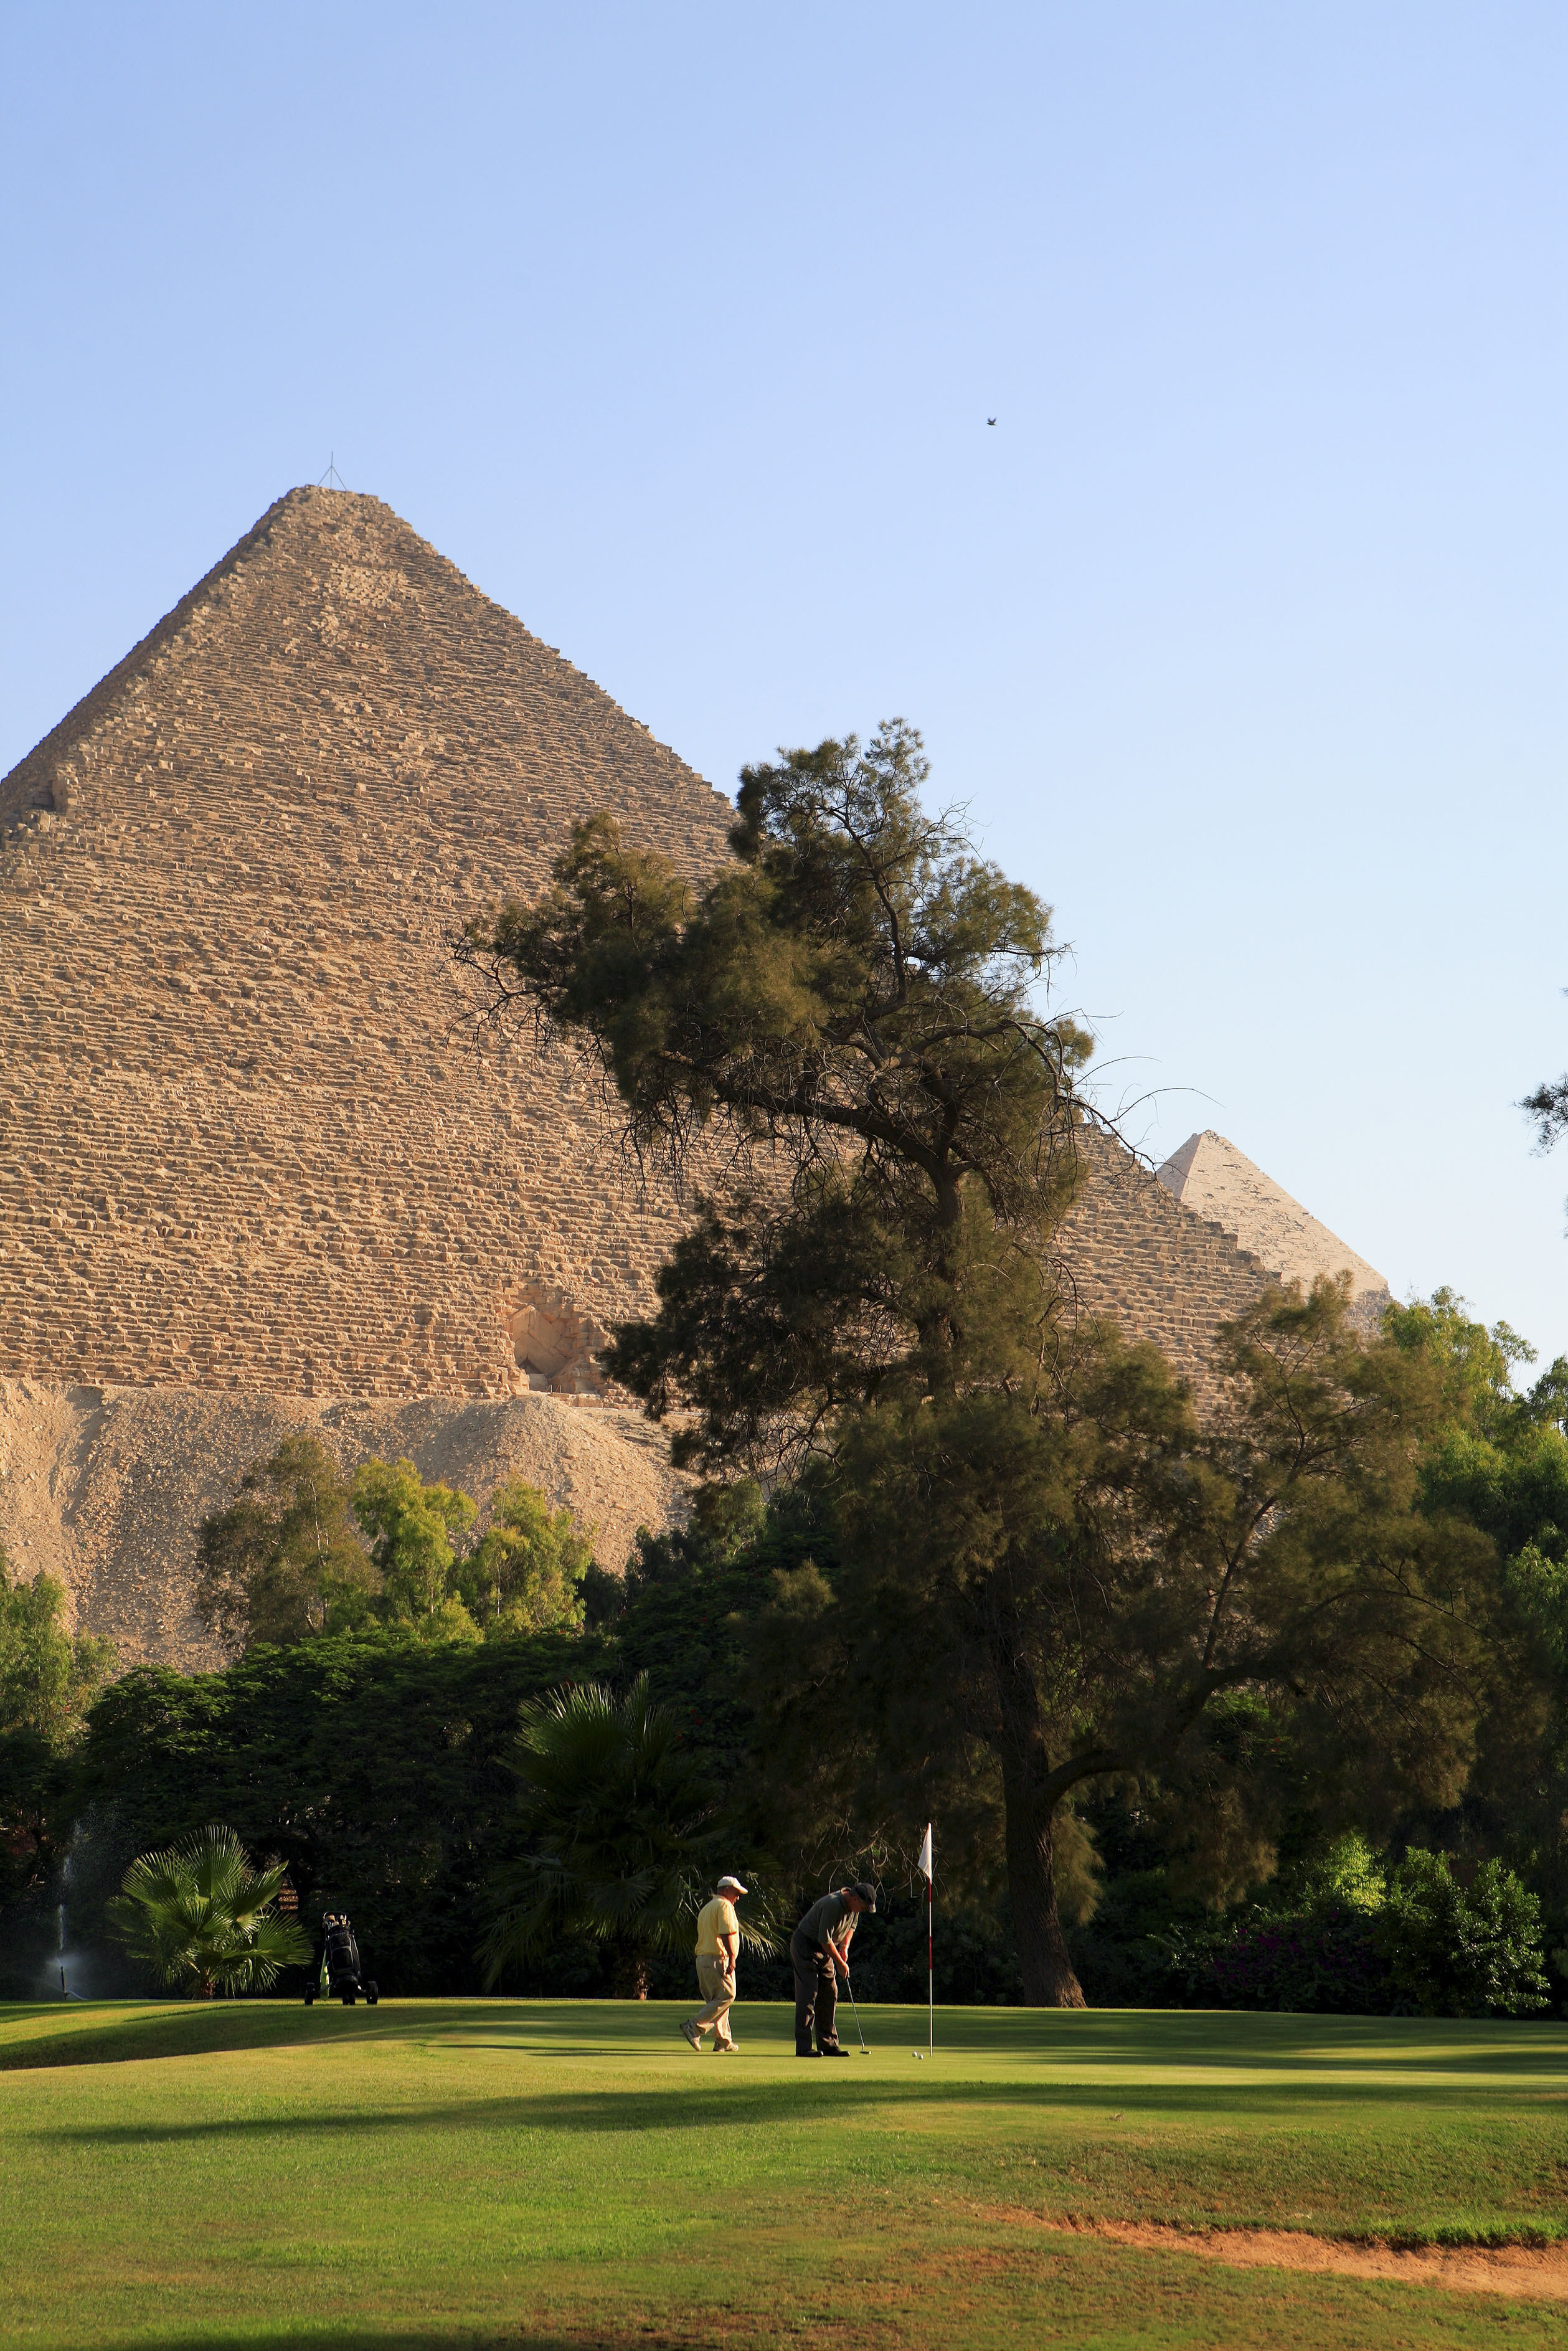 People golfing next to the Pyramid of Giza